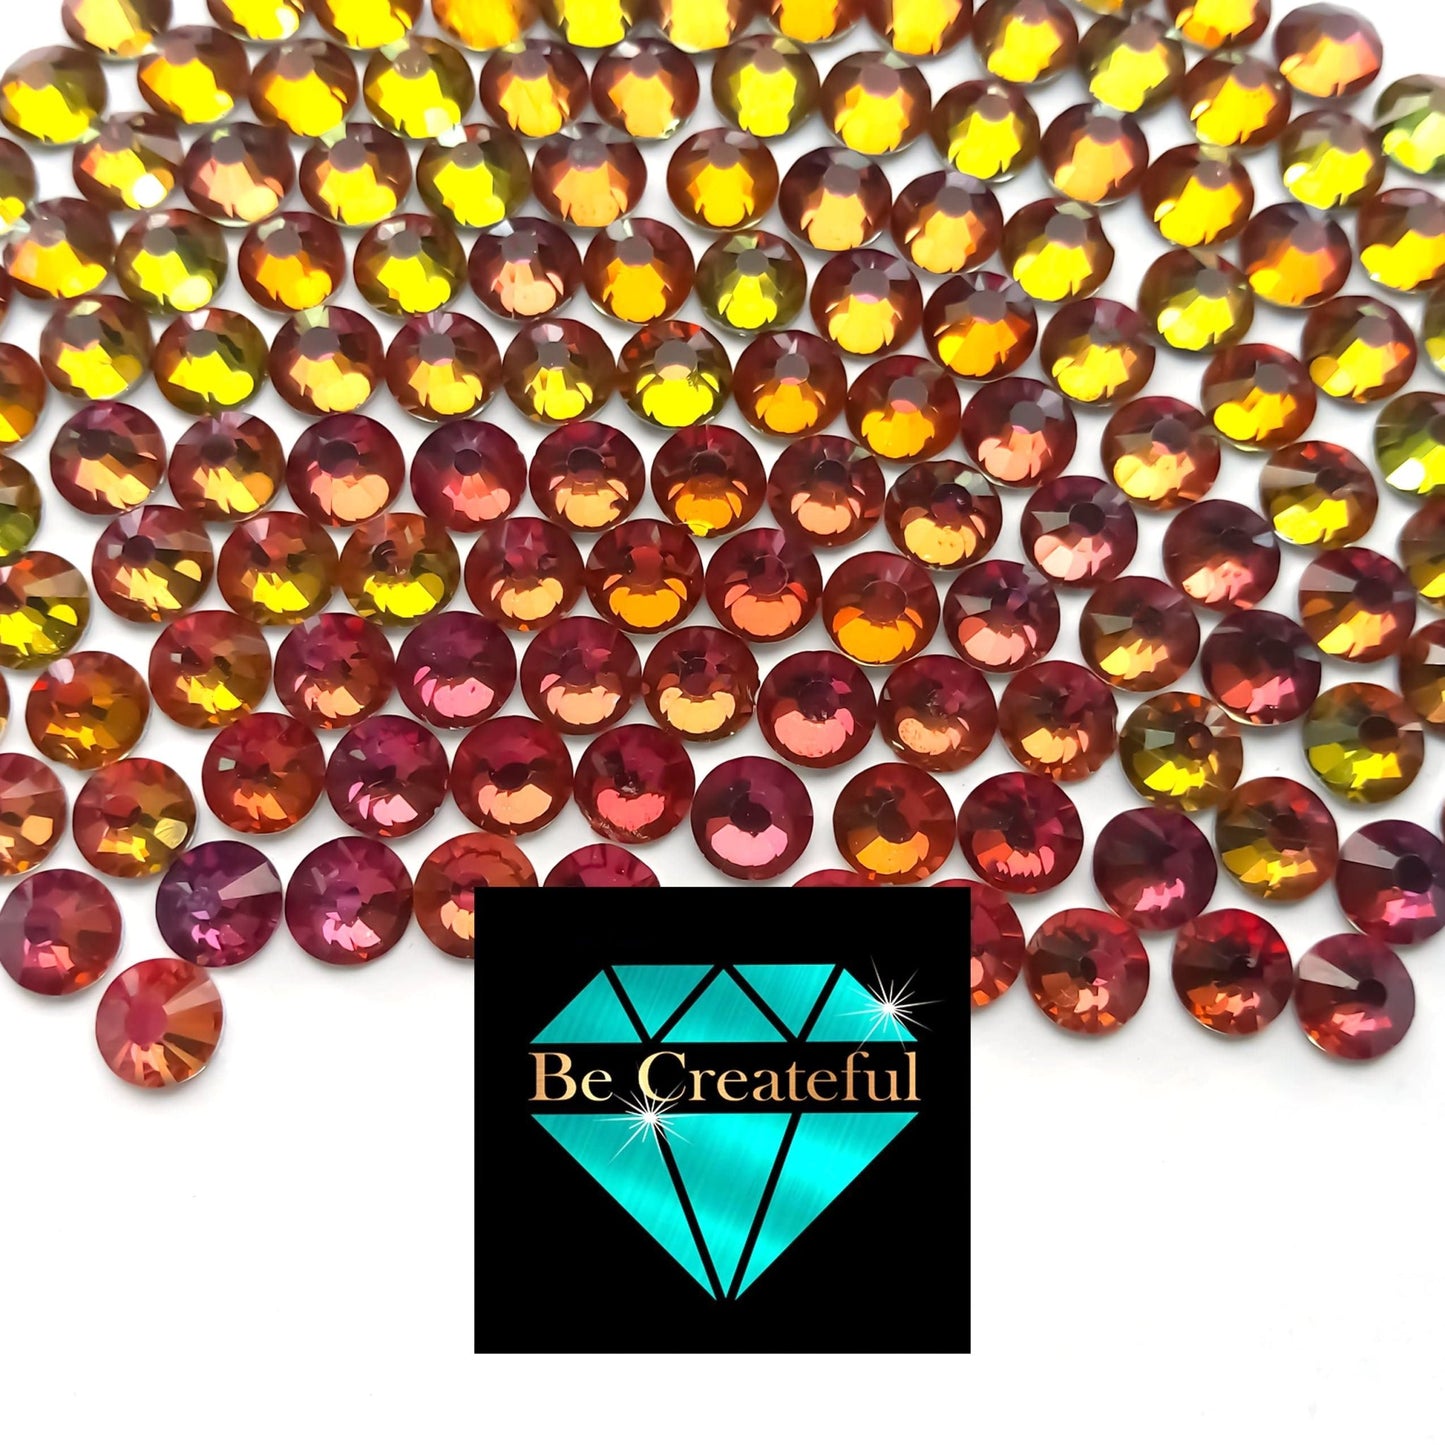 LUXE® Chameleon Siam Hotfix Rhinestones are high-quality 16 facet glass Rhinestone with intense sparkle and refraction.